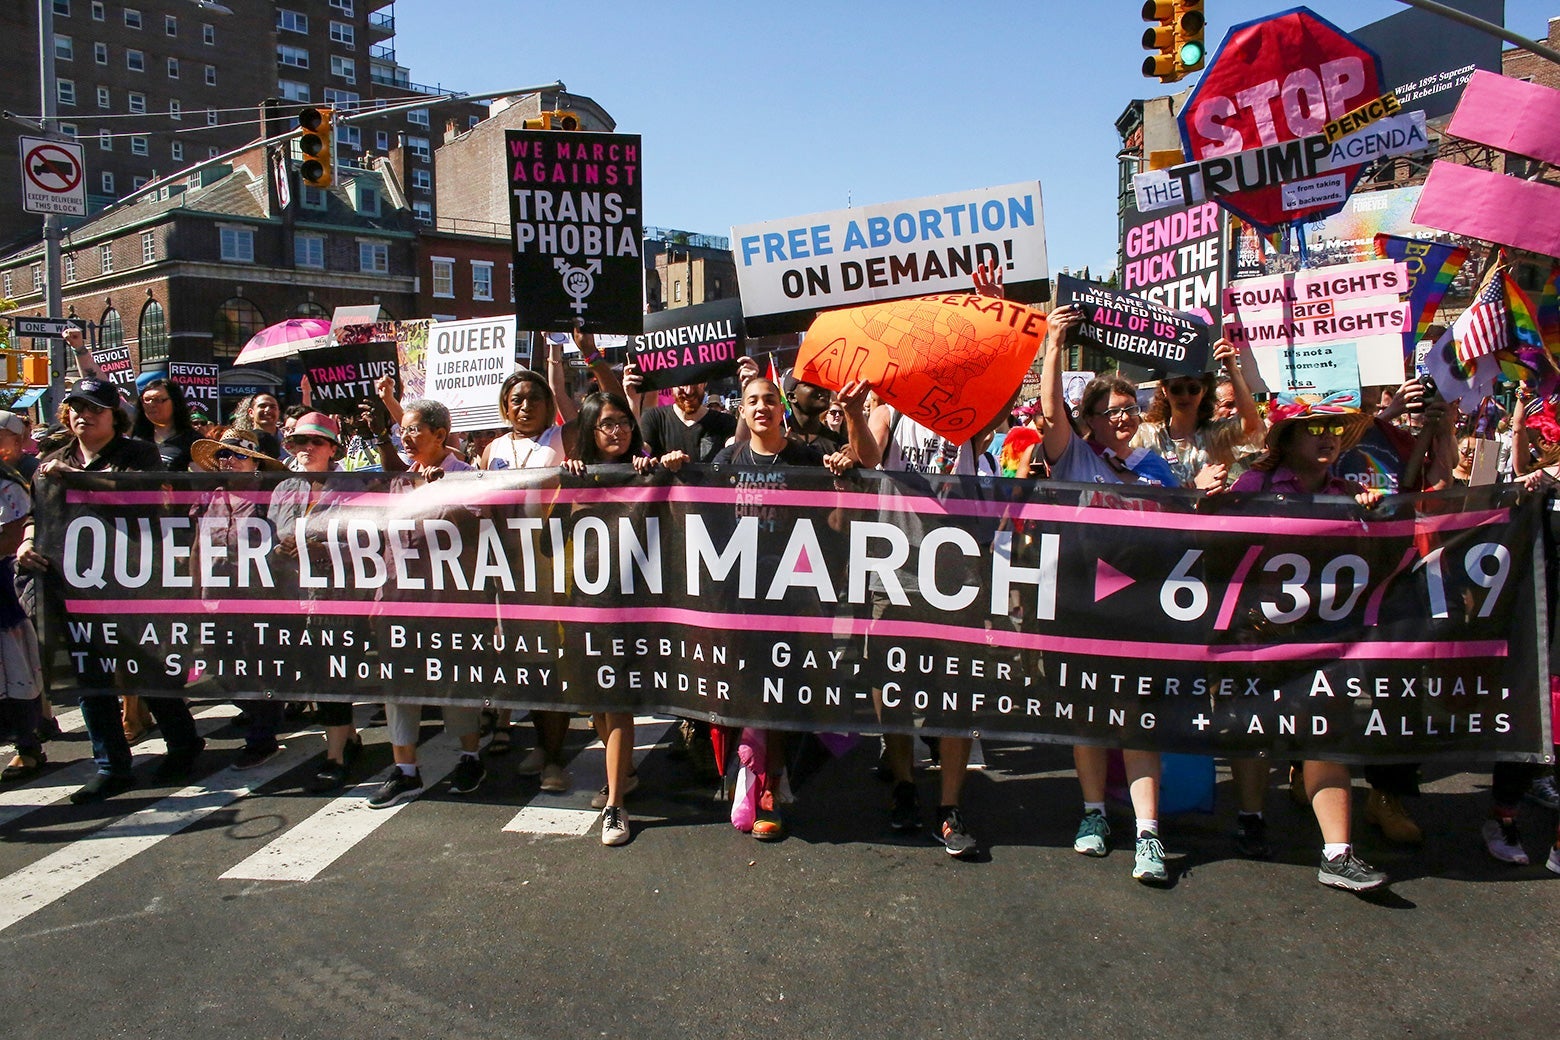 A crowd of protesters on a street carry signs and display a banner reading "Queer Liberation March."